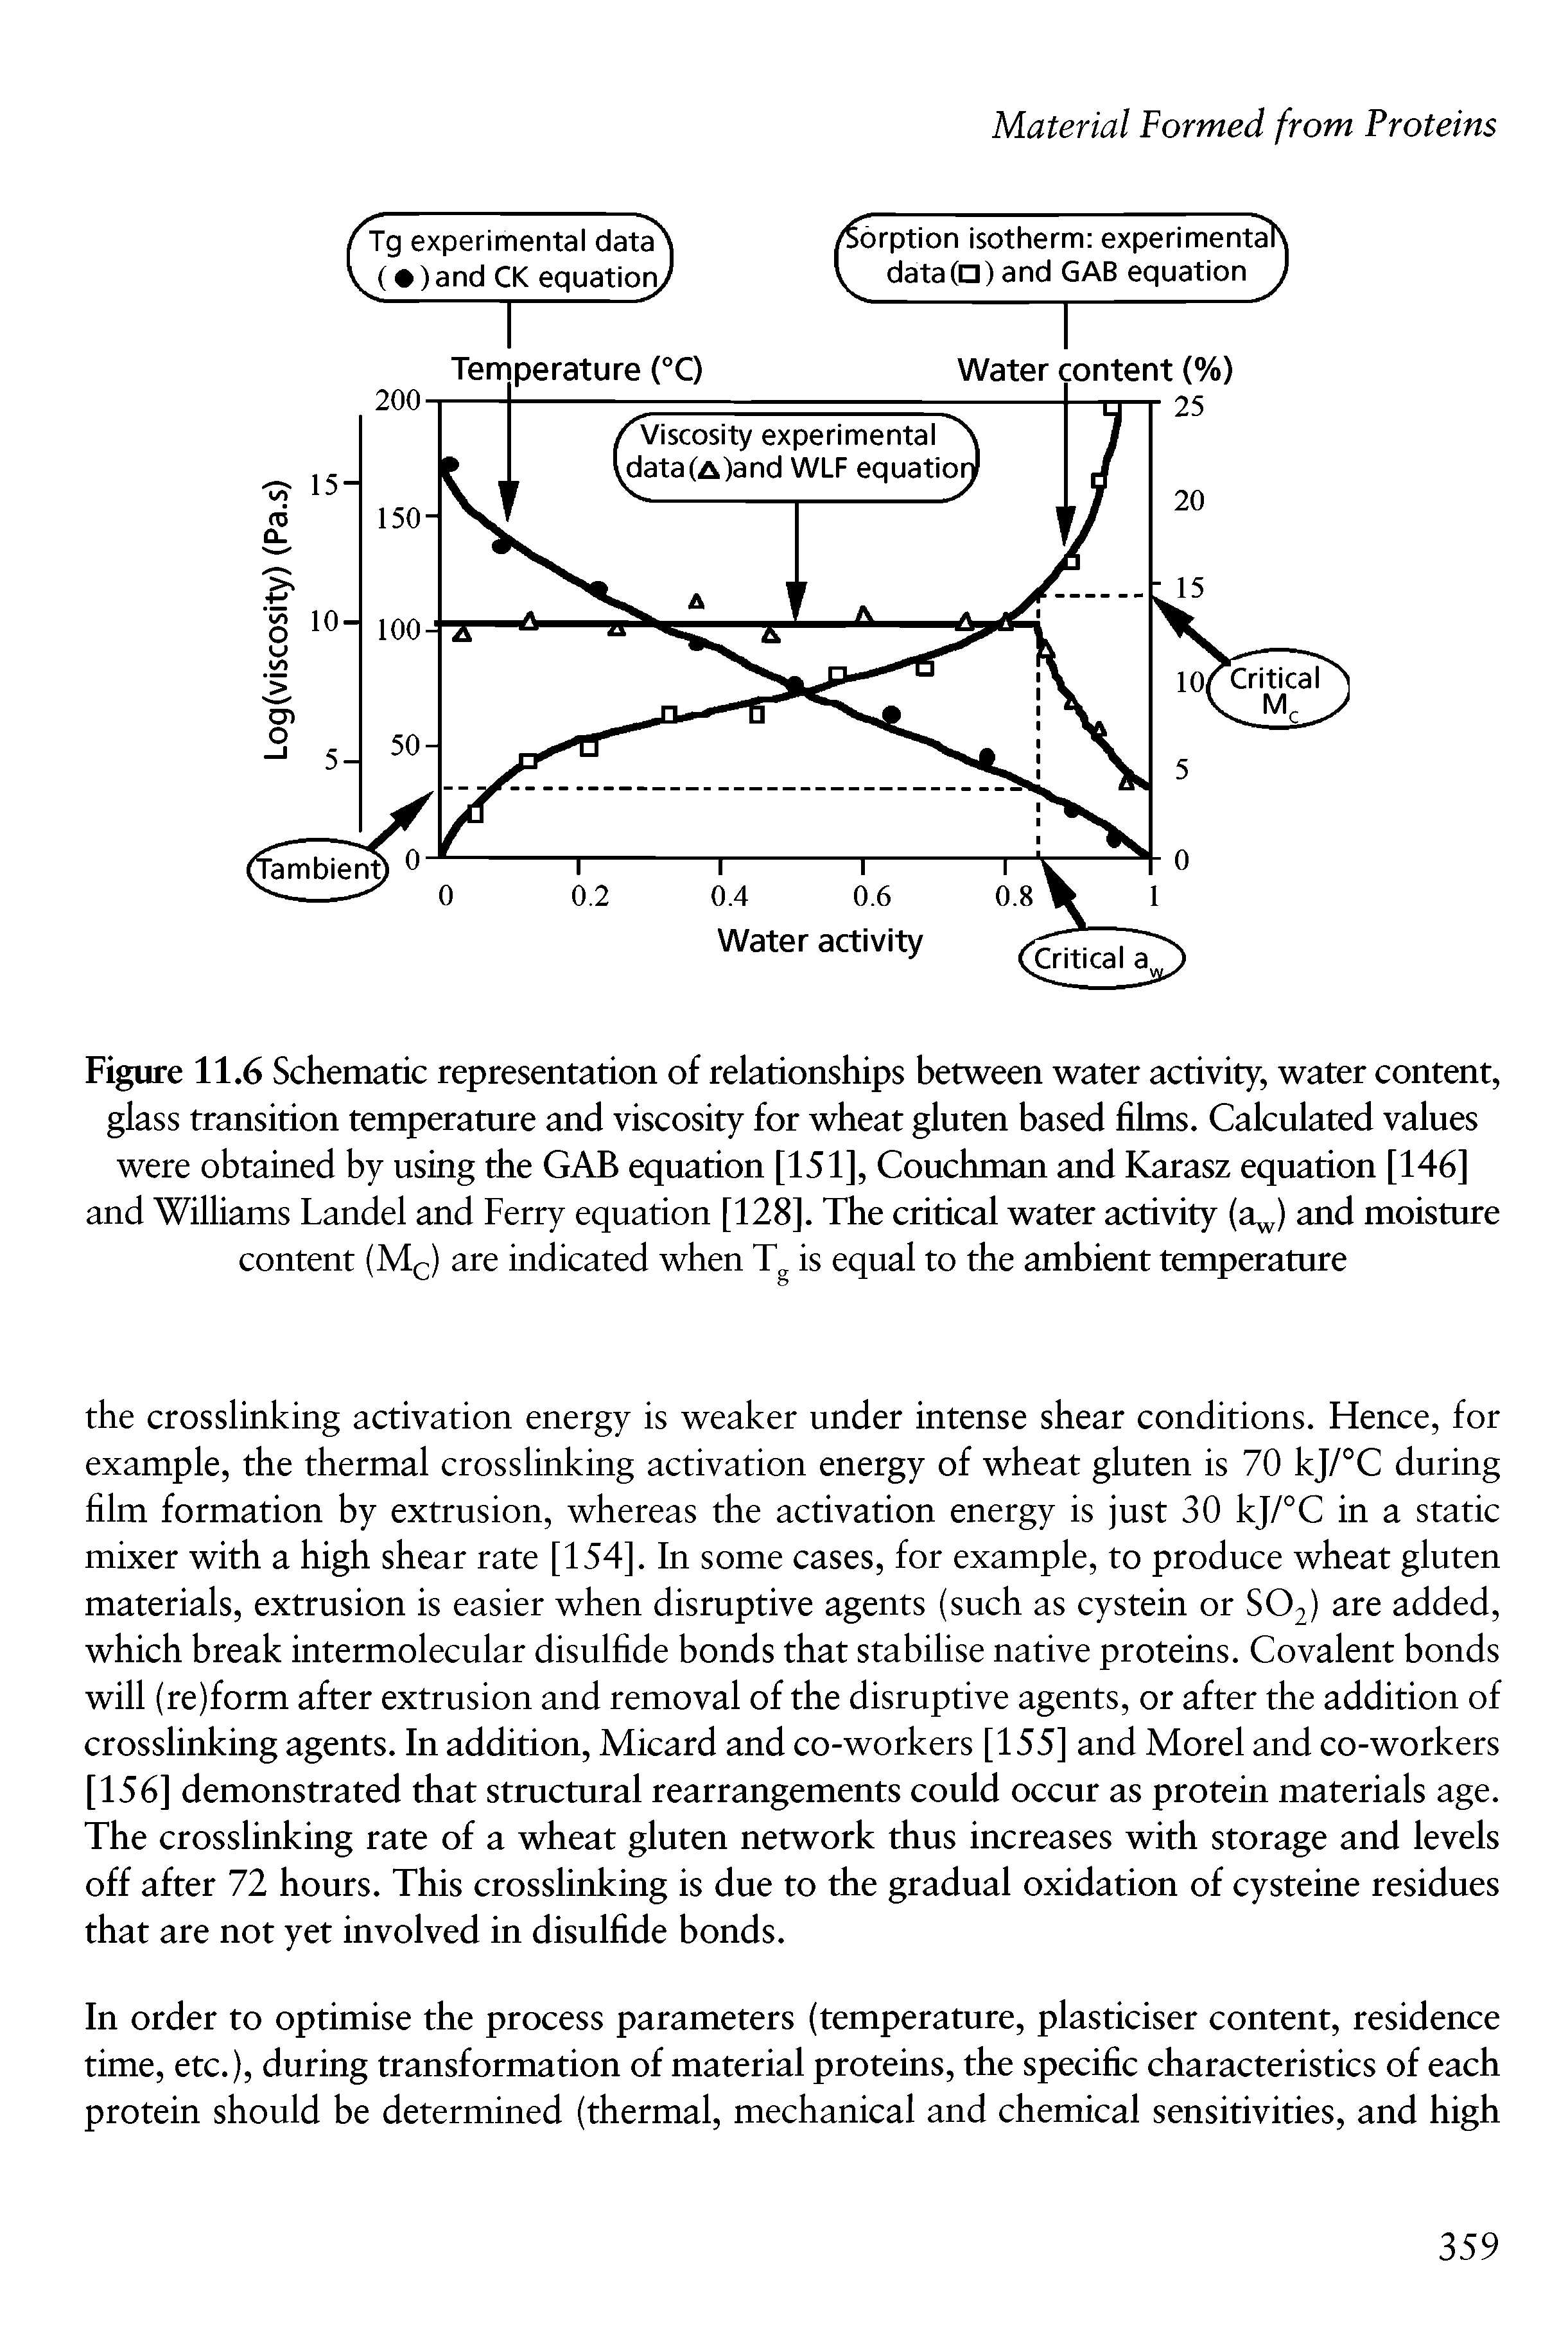 Figure 11.6 Schematic representation of relationships between water activity, water content, glass transition temperature and viscosity for wheat gluten based films. Calculated values were obtained by using the GAB equation [151], Couchman and Karasz equation [146] and Williams Landel and Ferry equation [128]. The critical water activity (a ) and moisture content (M ) are indicated when Tg is equal to the ambient temperature...